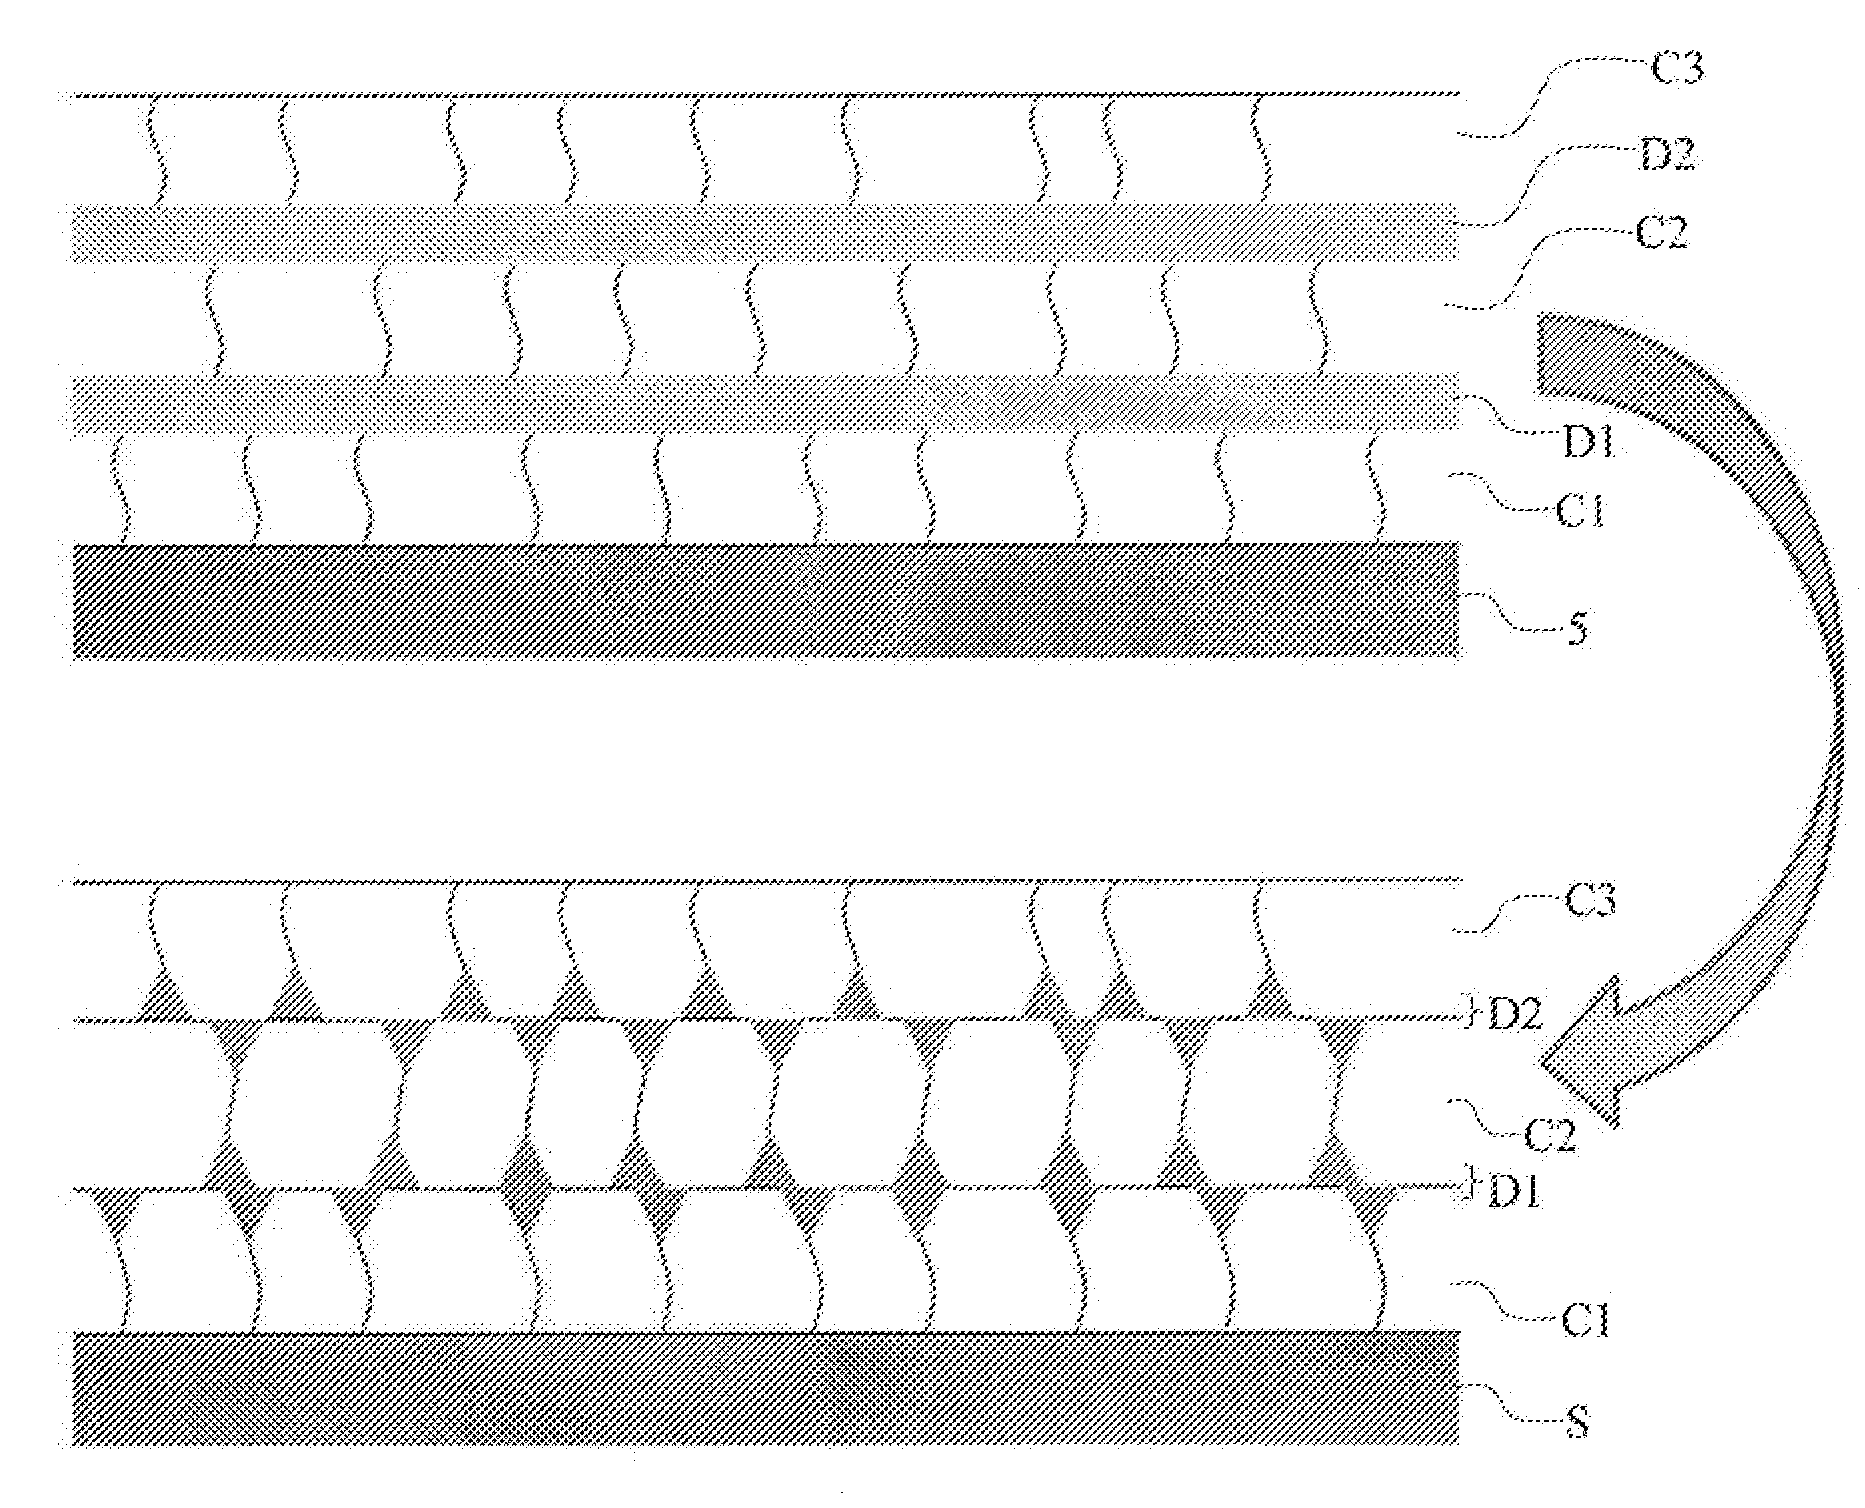 Seebeck/peltier thermoelectric conversion device employing a stack of alternated nanometric layers of conductive and dielectric material and fabrication process